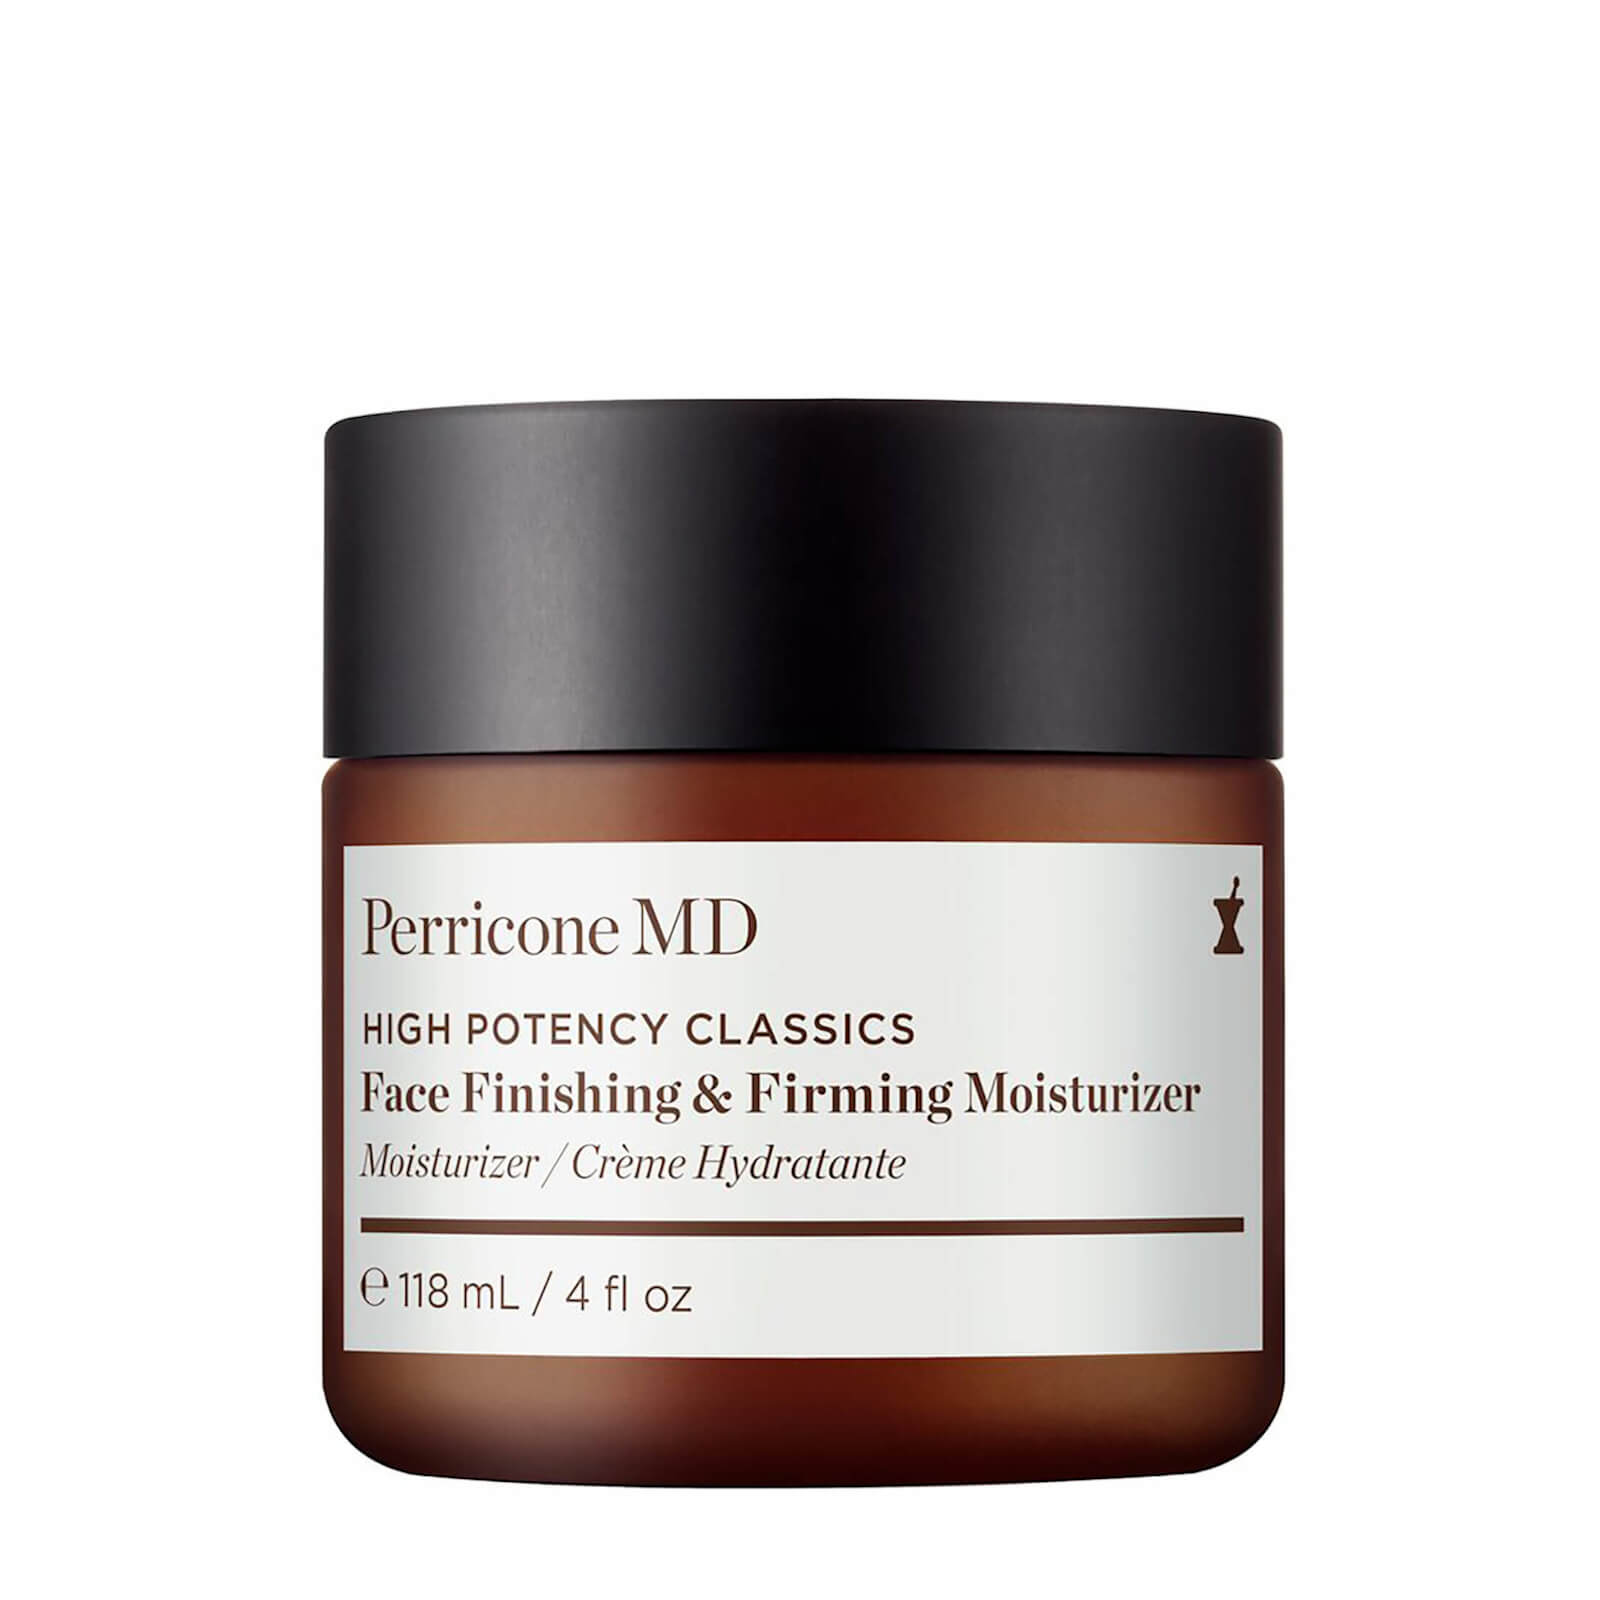 Perricone MD High Potency Classics Face Finishing & Firming Moisturizer - 4 oz / 118ml